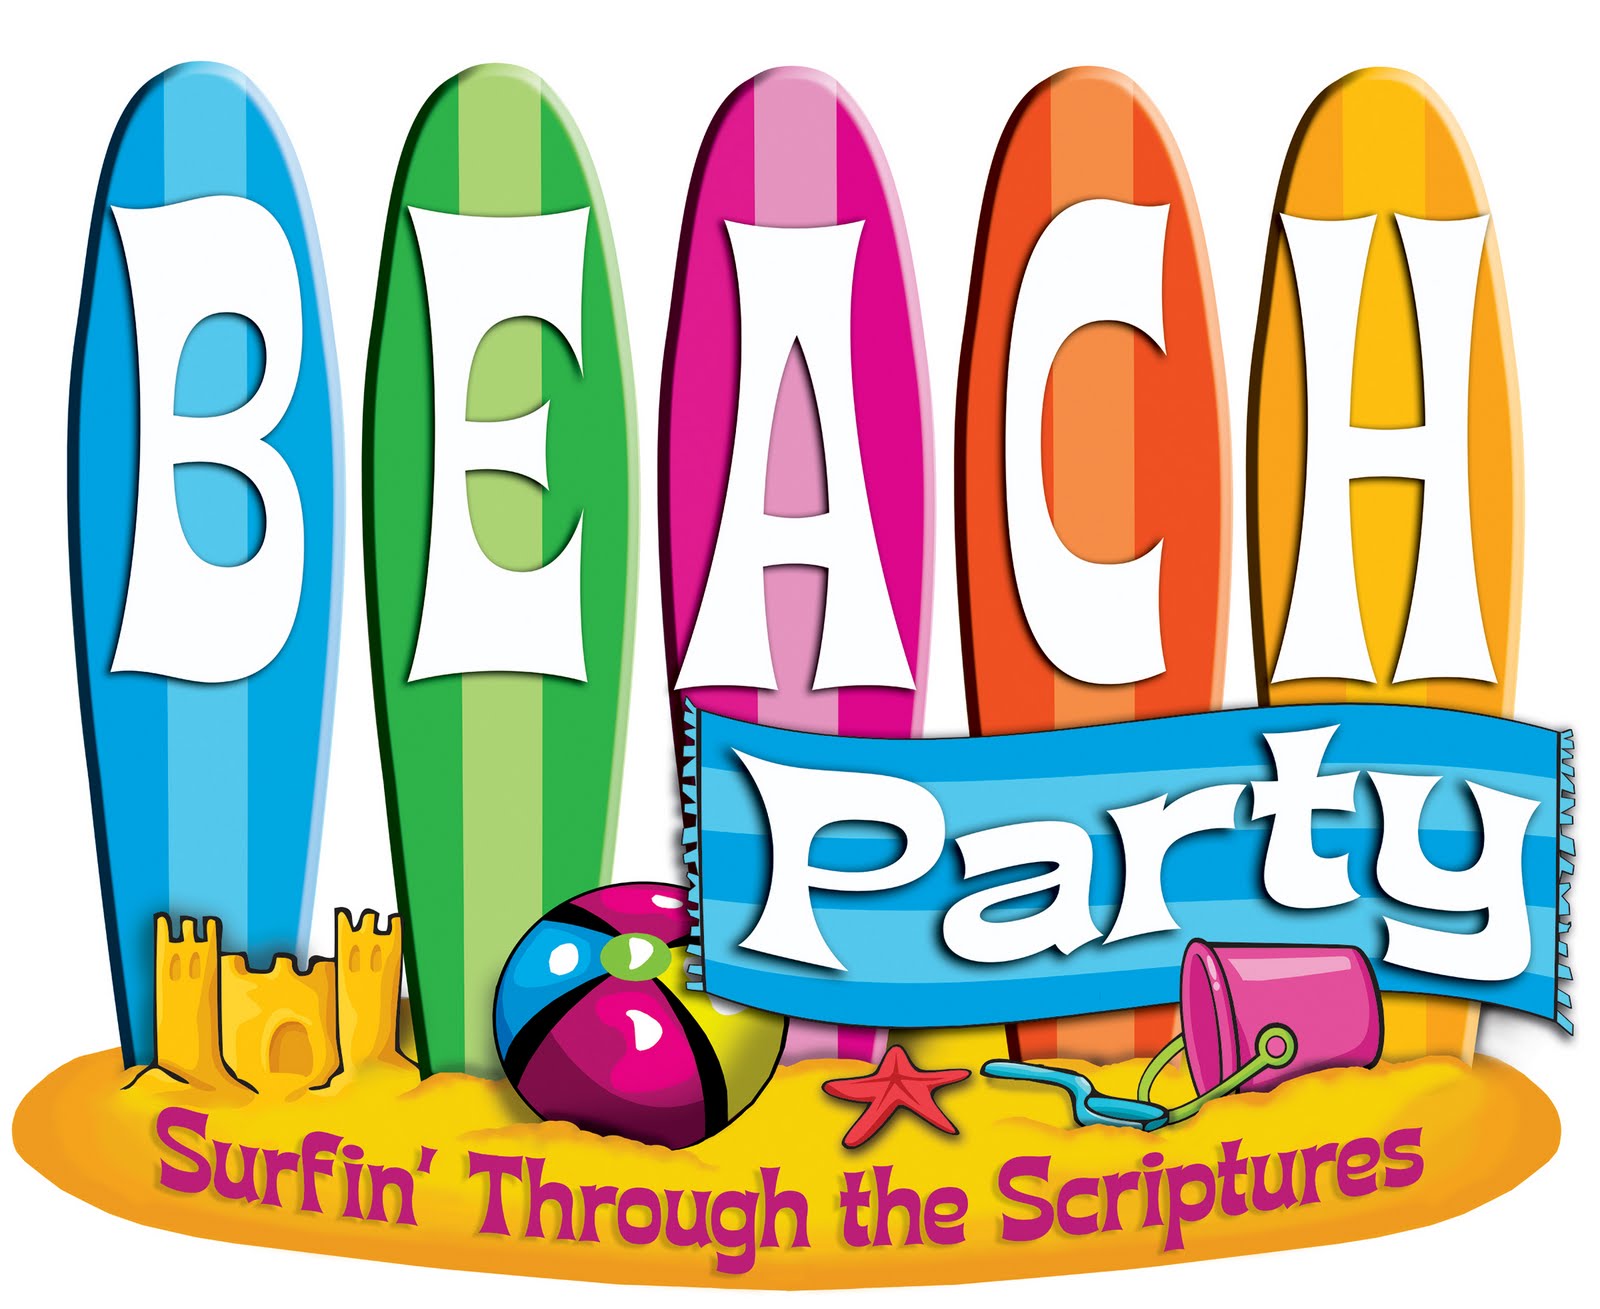 Beach Party Svg More Products